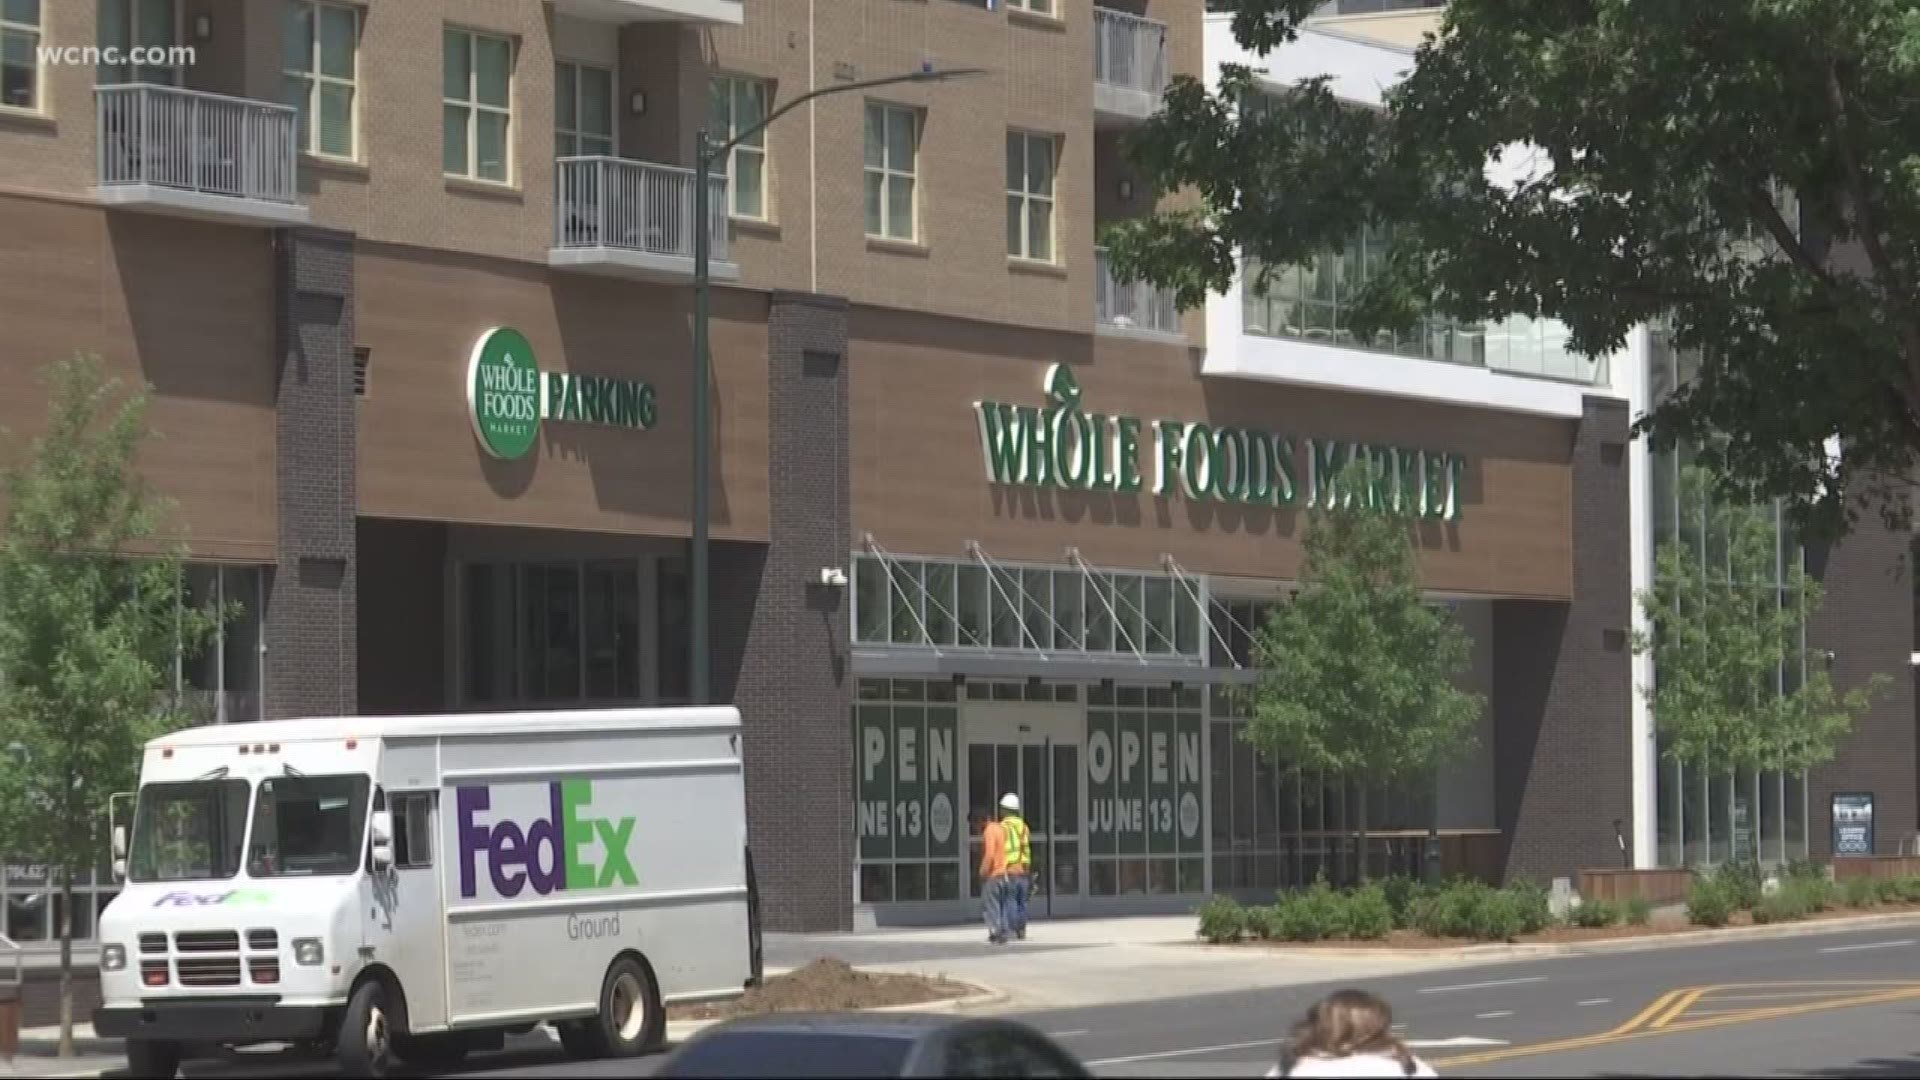 A brand-new Whole Foods will finally open Wednesday, becoming the first full-size grocery store to ever open in the heart of uptown Charlotte.